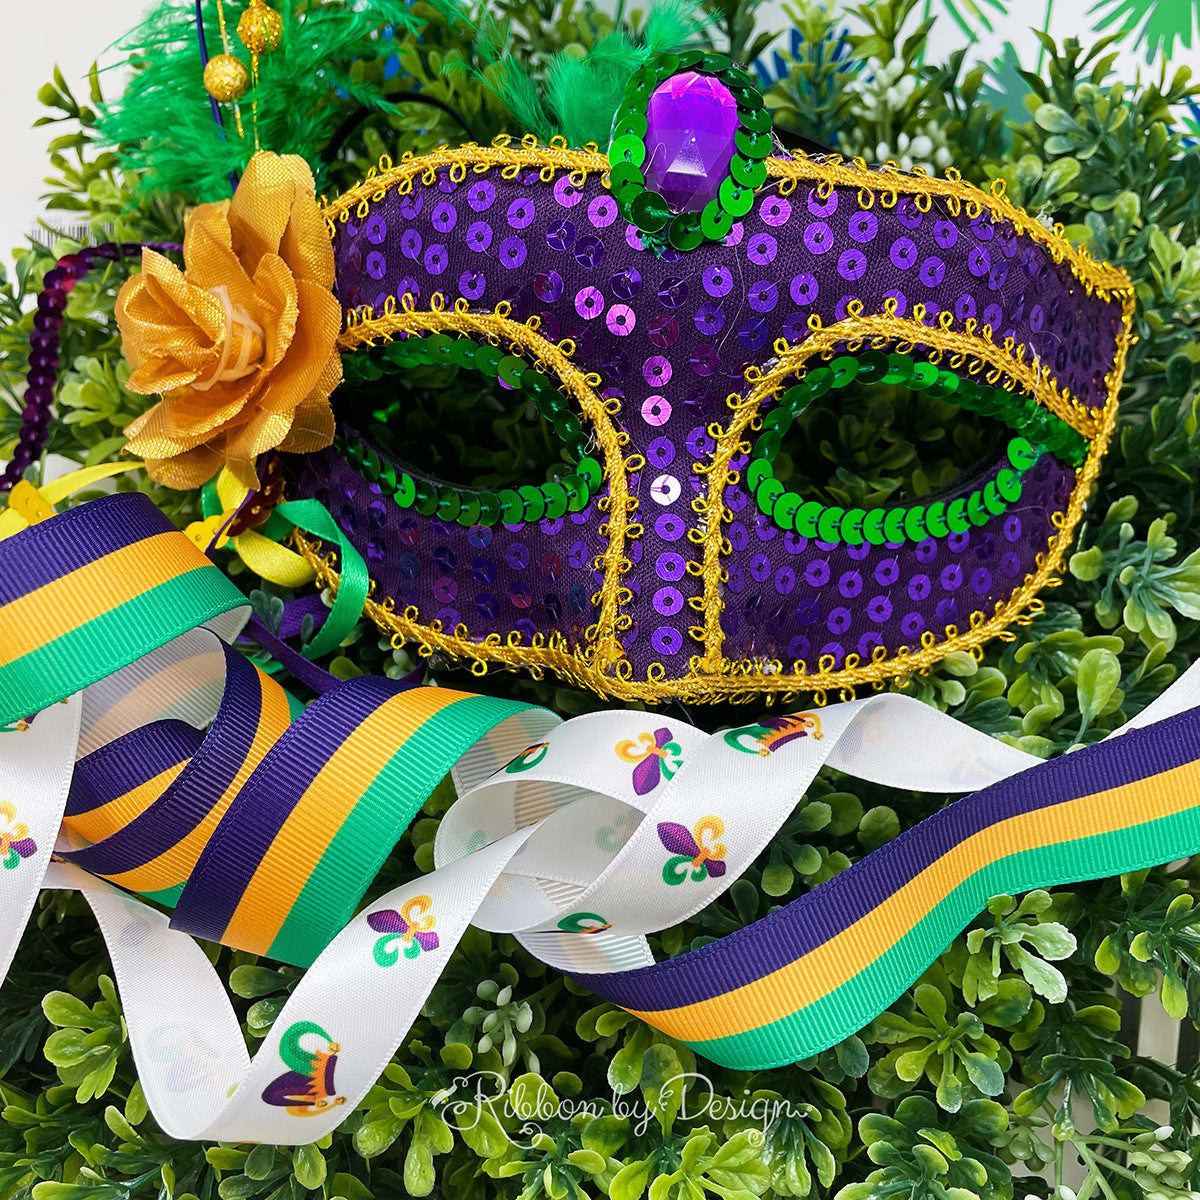 Make a splash at the Mardi Gras party using our Mardi Gras stripes and jester hats!